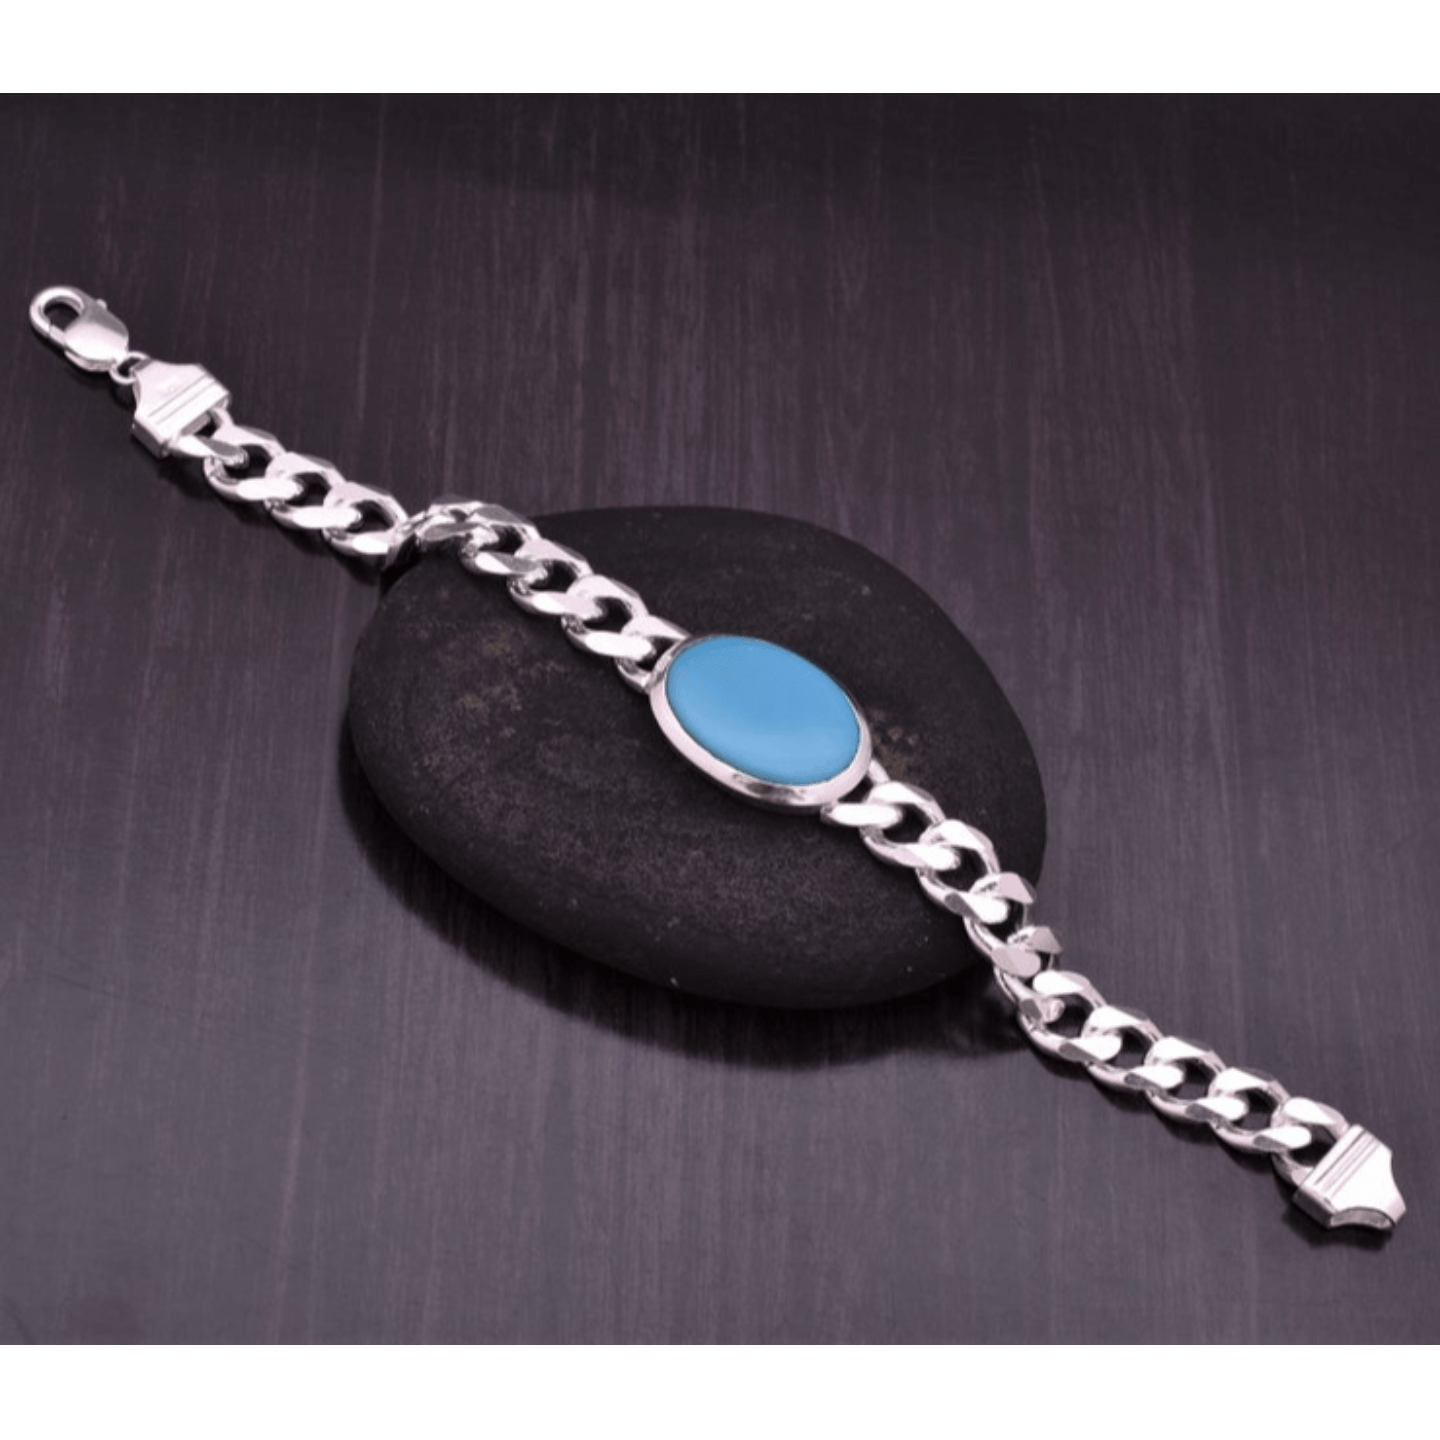 Solid 925 Sterling Silver Synthetic Turquoise Chain Bracelet - Silver Curb & Link Chain Bracelet -Length 8.5 Inches -Heavy Handmade Bracelet